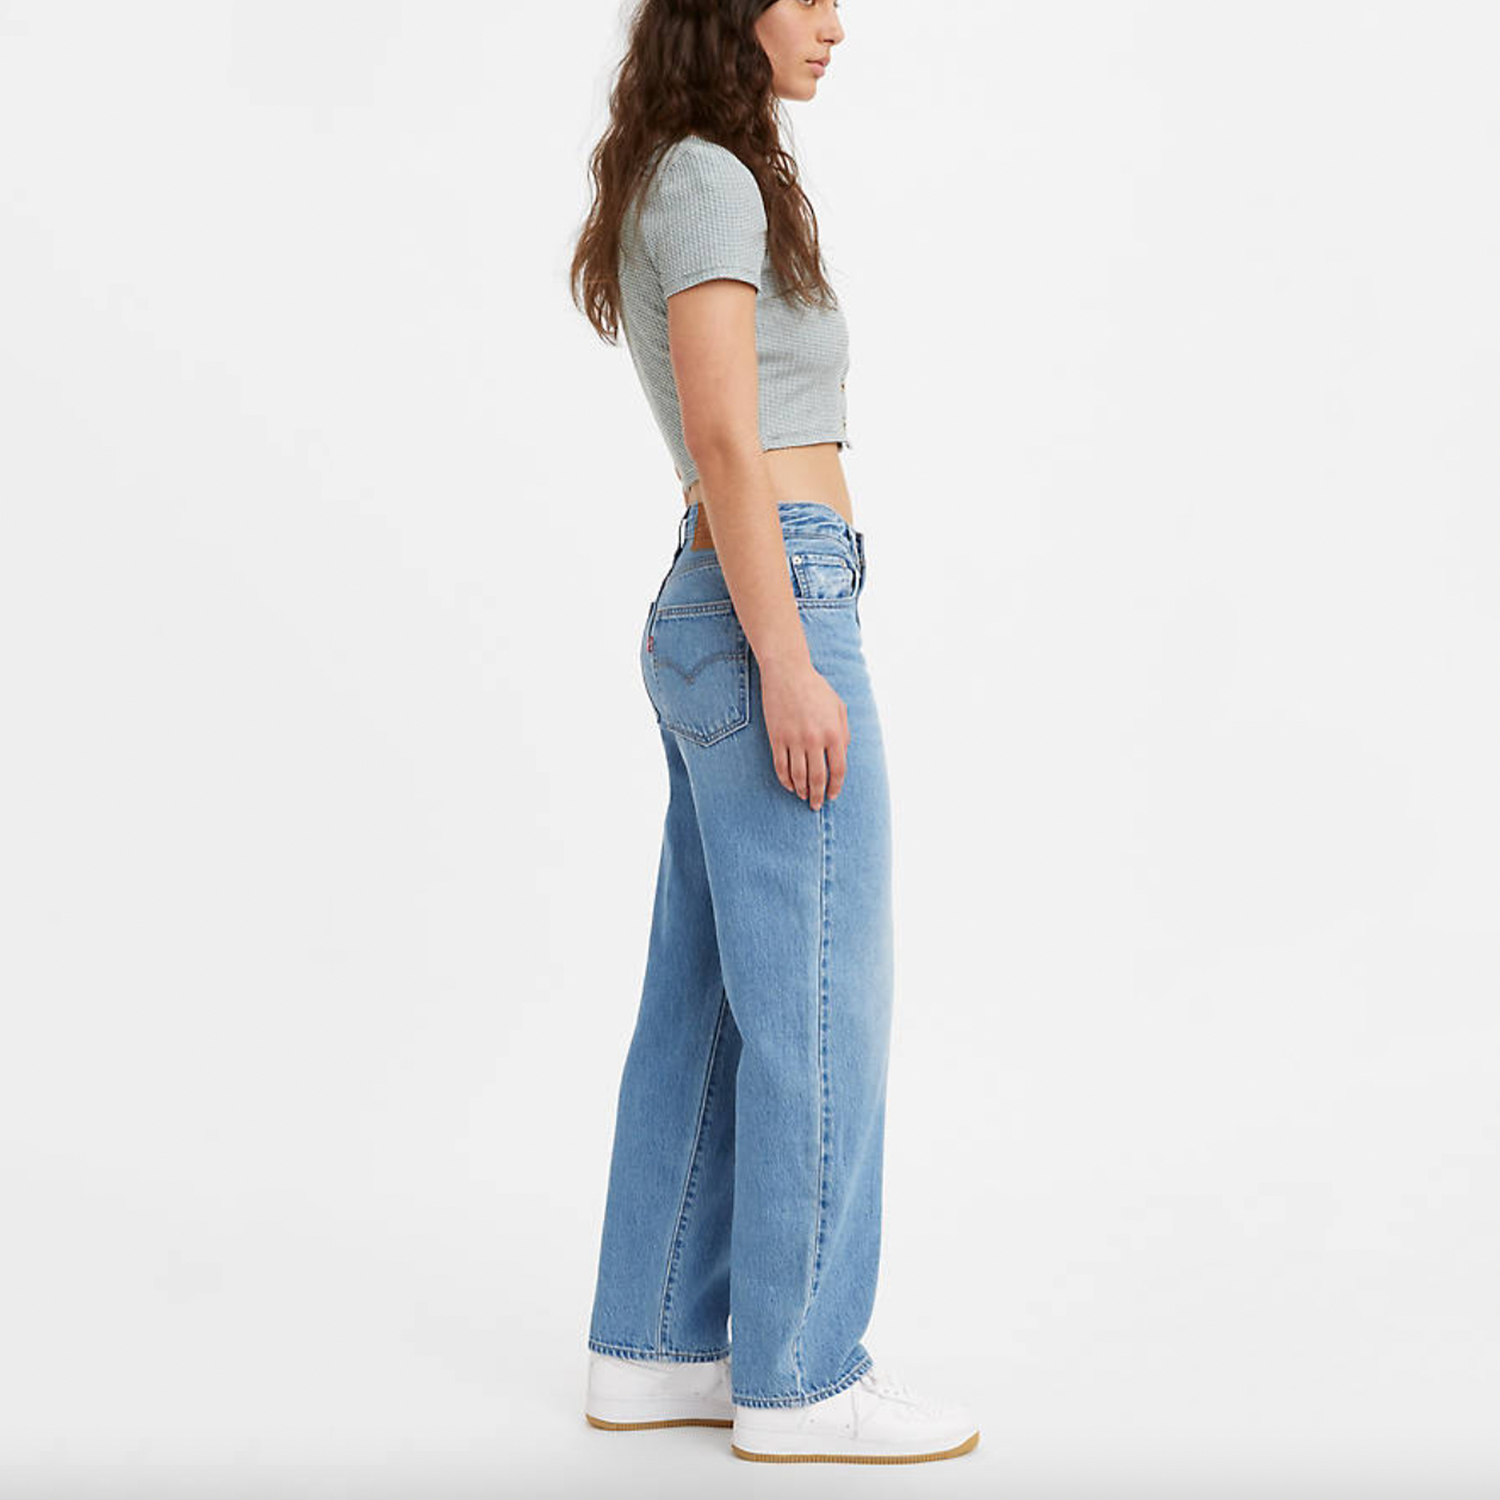 Levi's Baggy Dad Jean. The kind of jean you might steal from your dad's closet but baggier. These jeans have a mid rise and straight leg. This pair is relaxed yet flattering with extra room for a subtle edge. Throw on your favorite kicks for that chill ‘90s look any day of the week